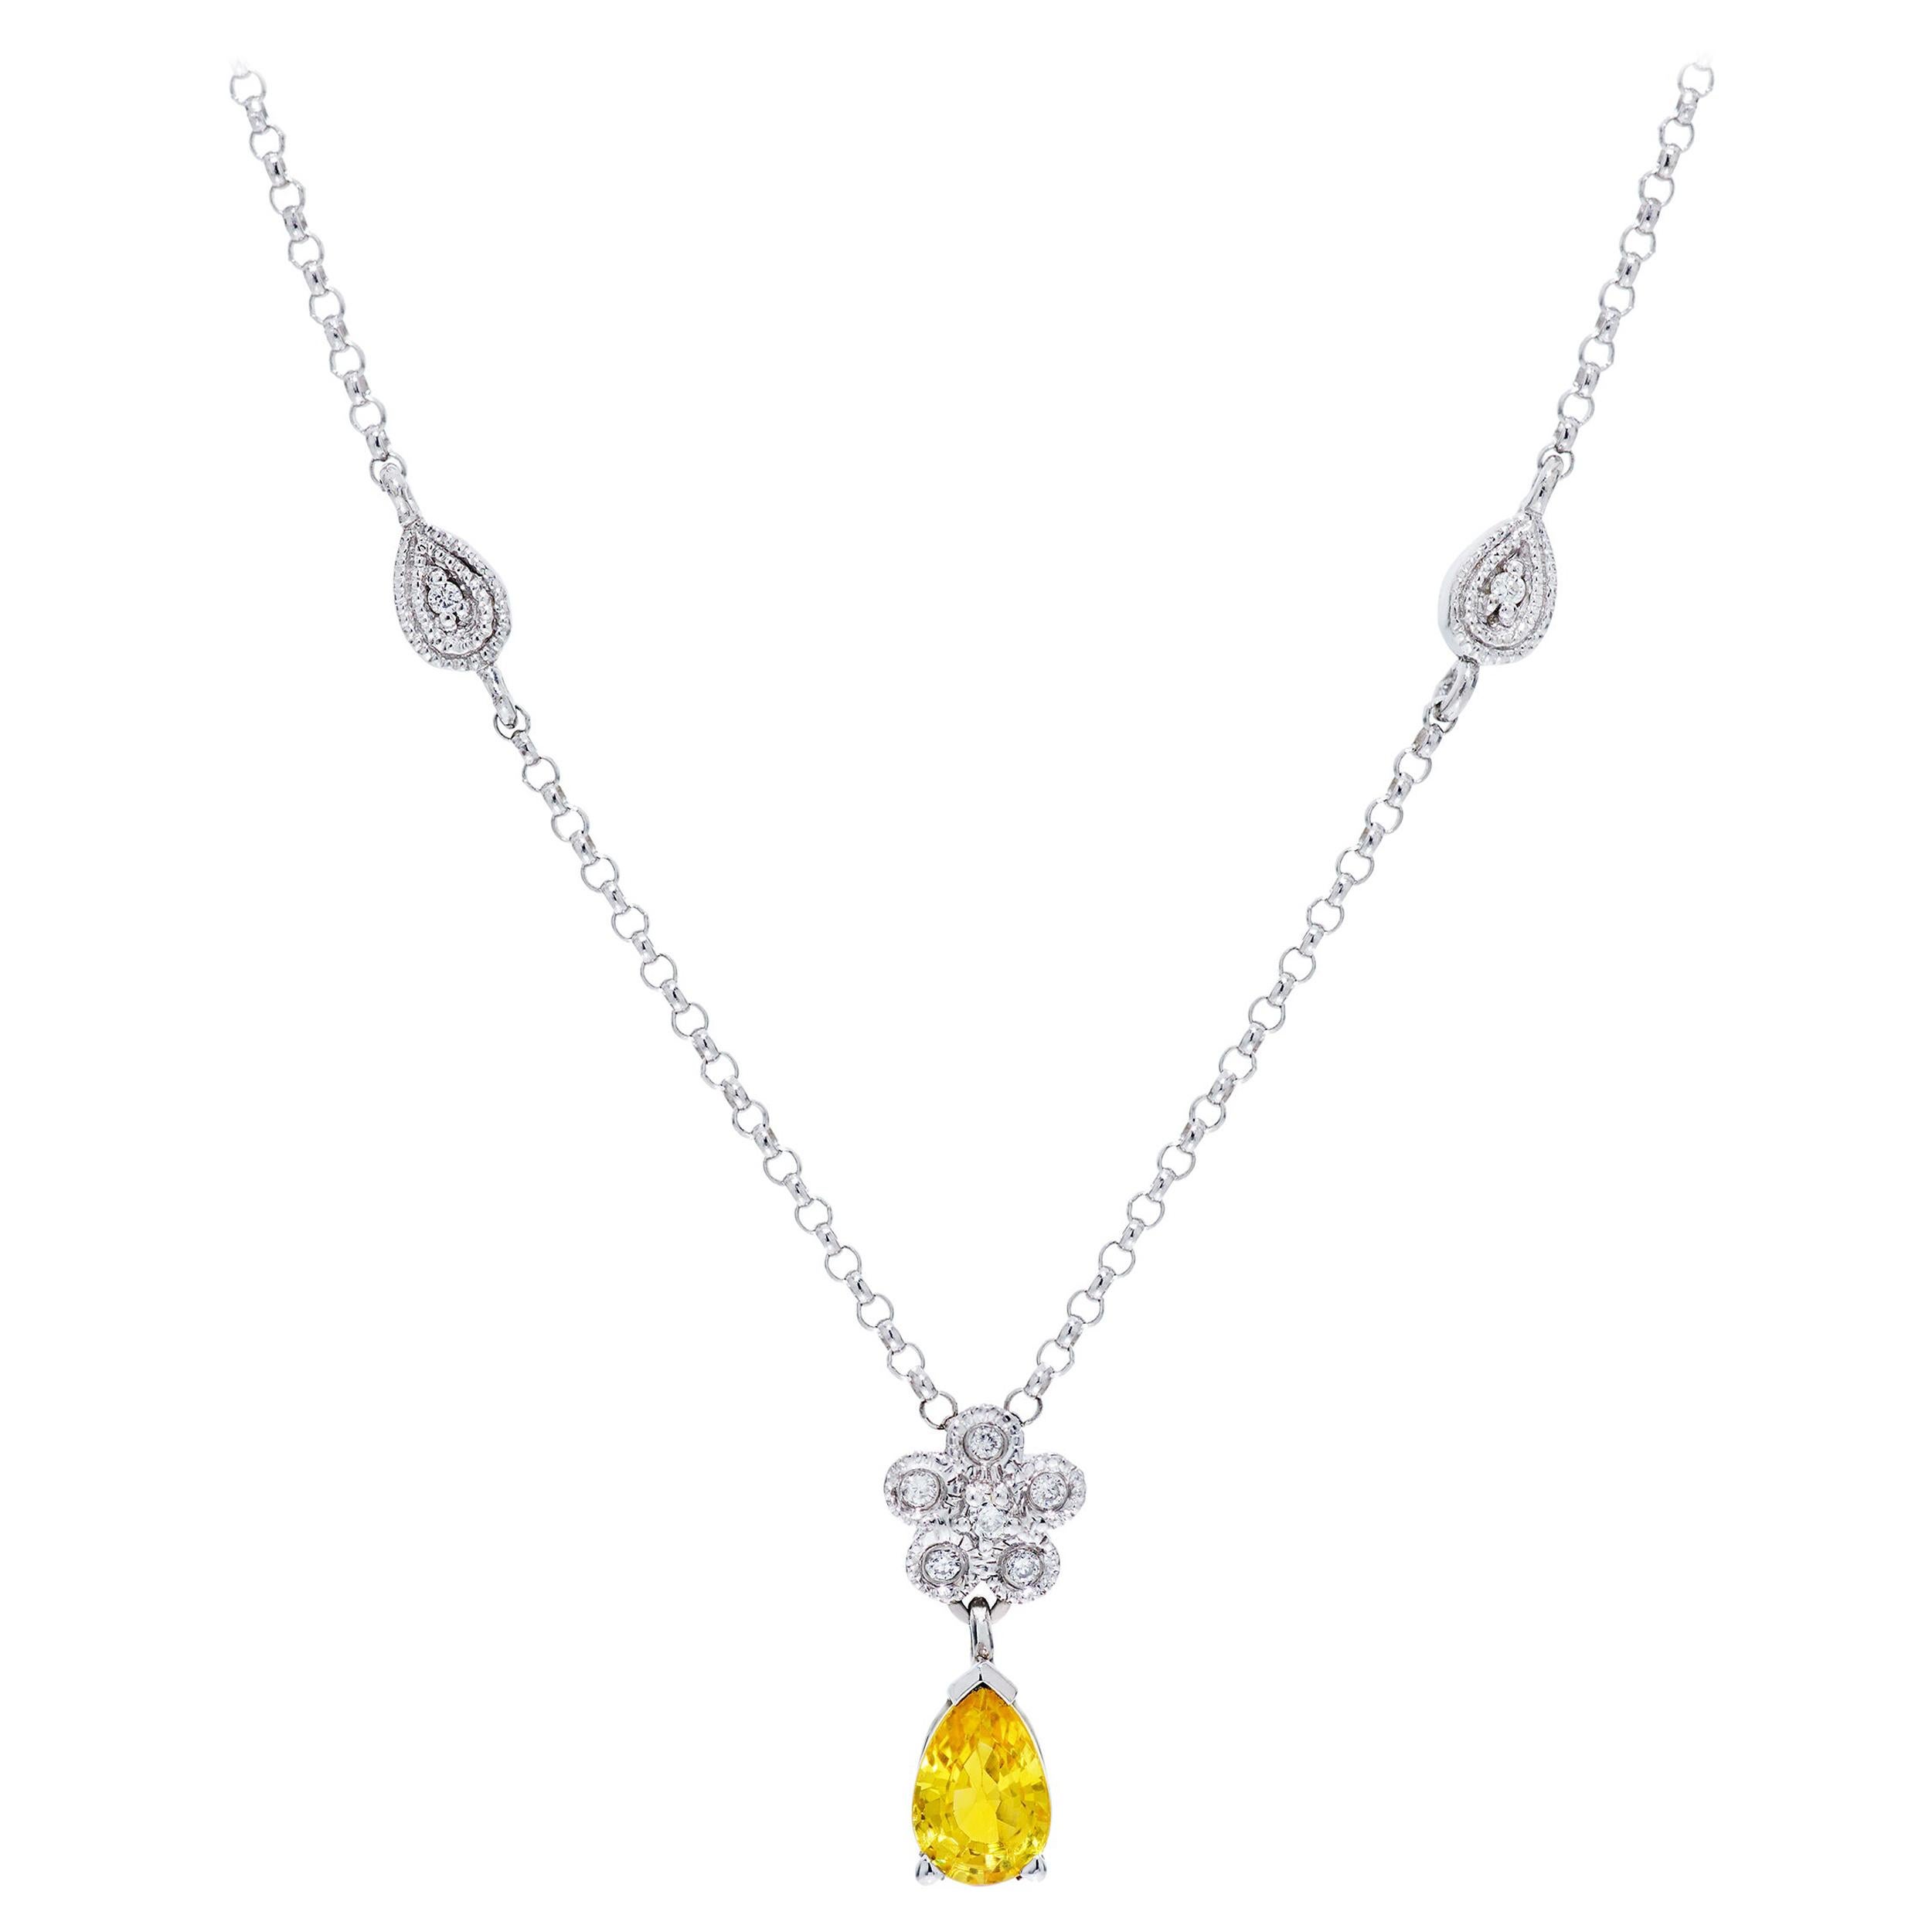 A wonderful matching necklace and earring set.  The necklace feature a 1.26 Carats of Yellow Sapphire and Diamonds.  The 18